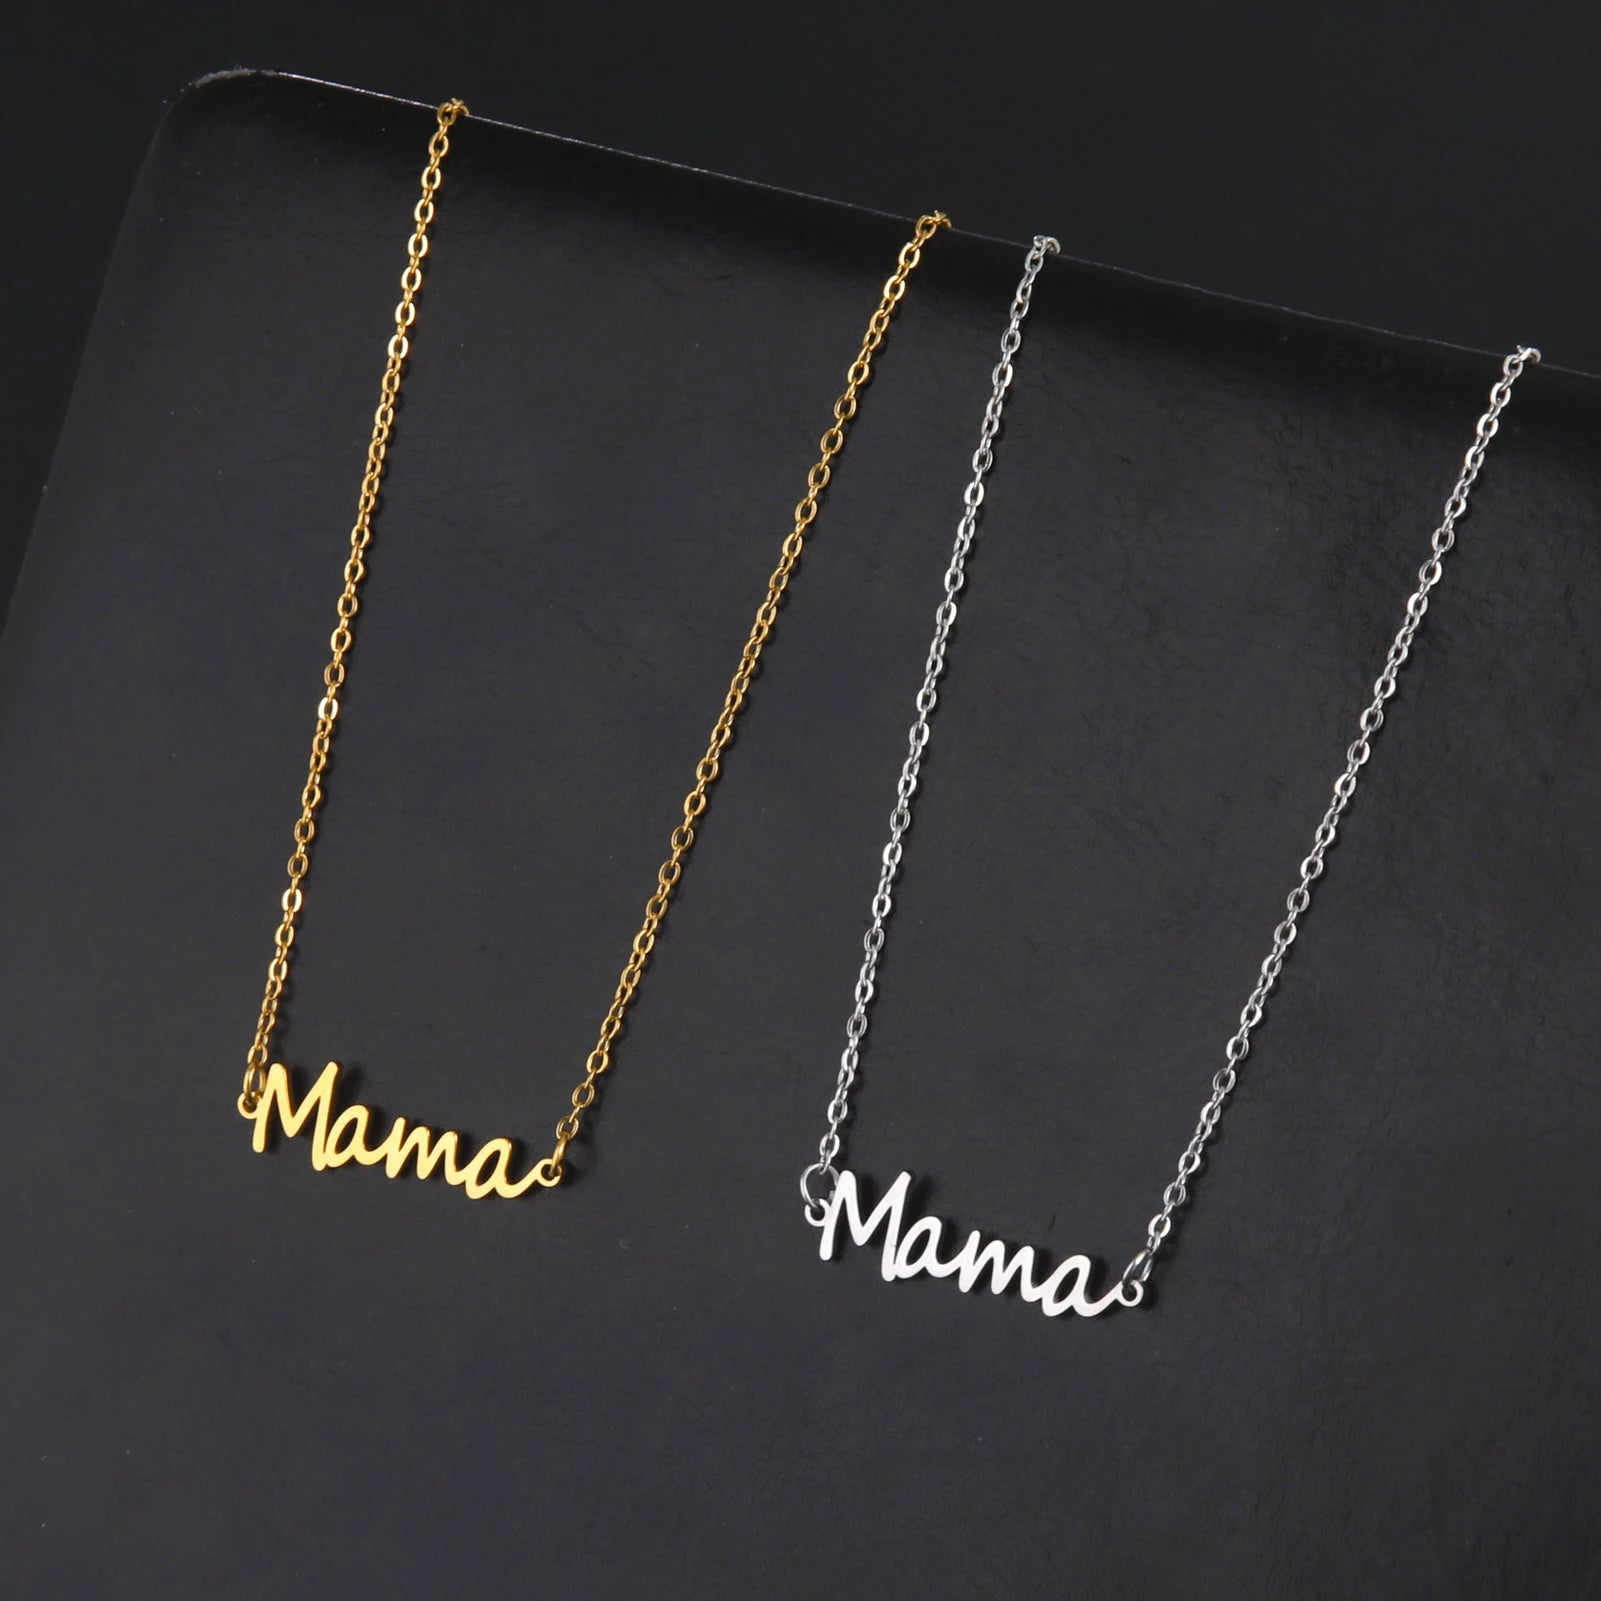 Sipuris Hot Fashion Mama Letter Necklace Jewelry Gifts For Mother's Day